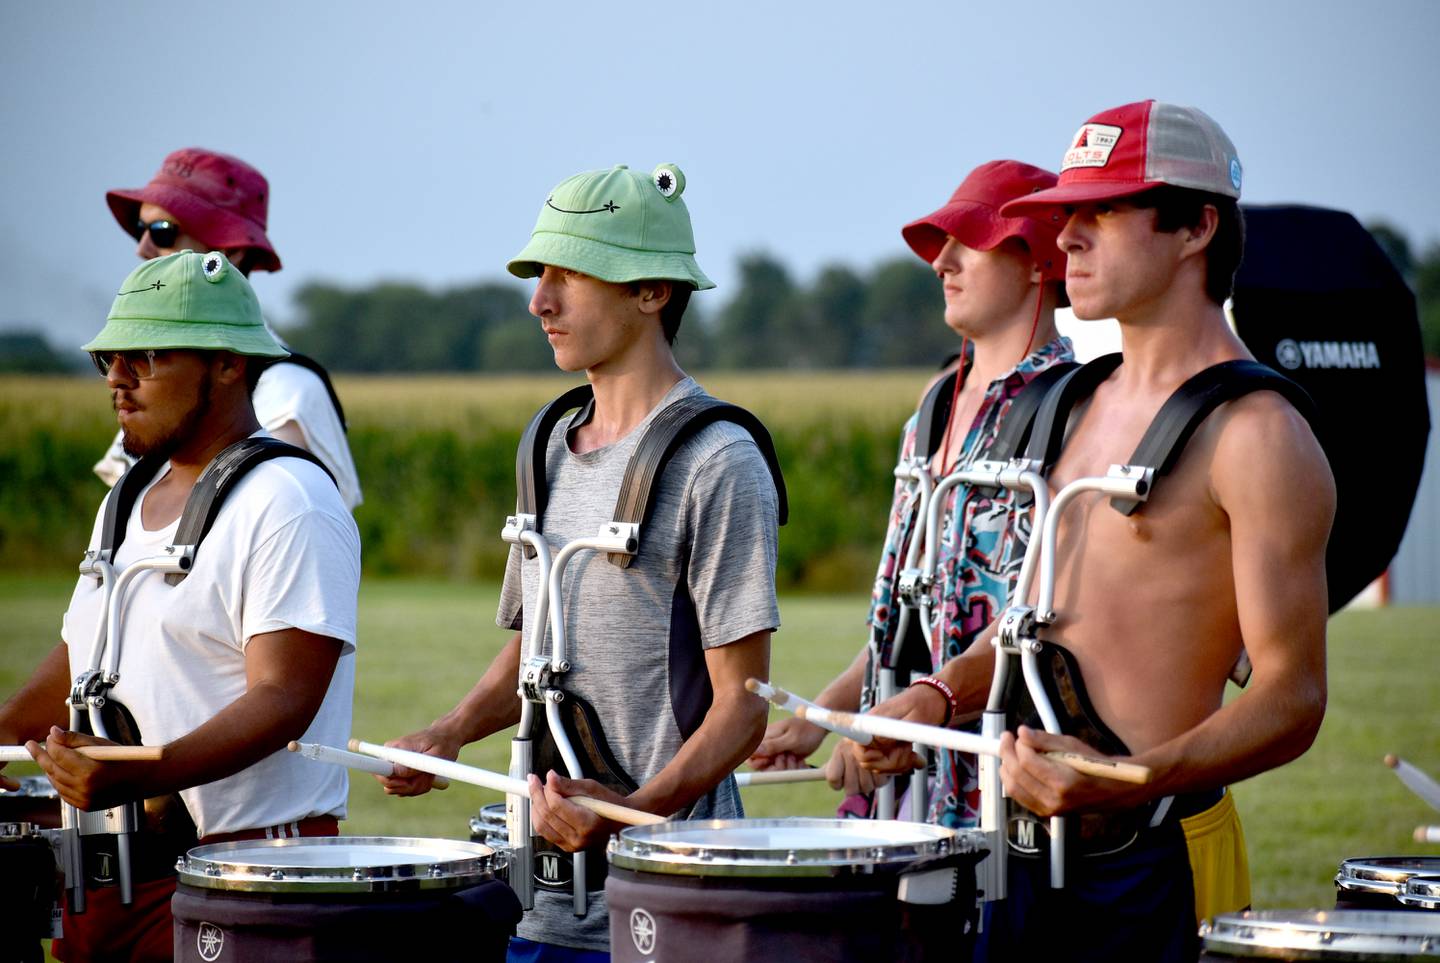 Colts Drum and Bugle Corps to perform, featuring local grad Creston News